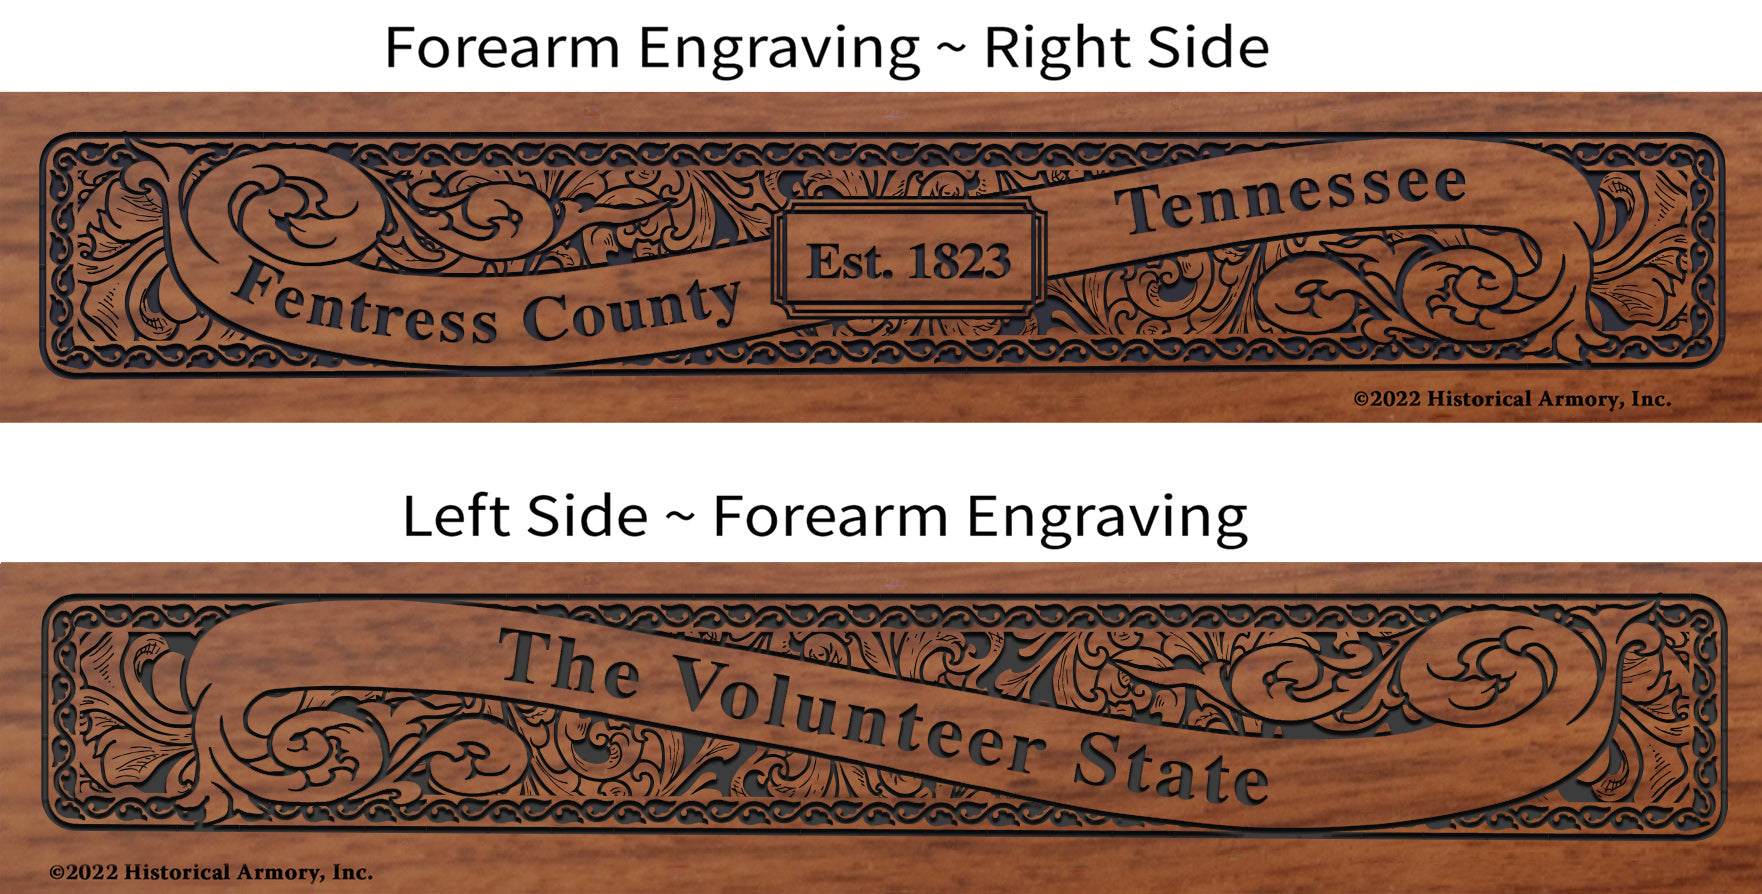 Fentress County Tennessee Engraved Rifle Forearm